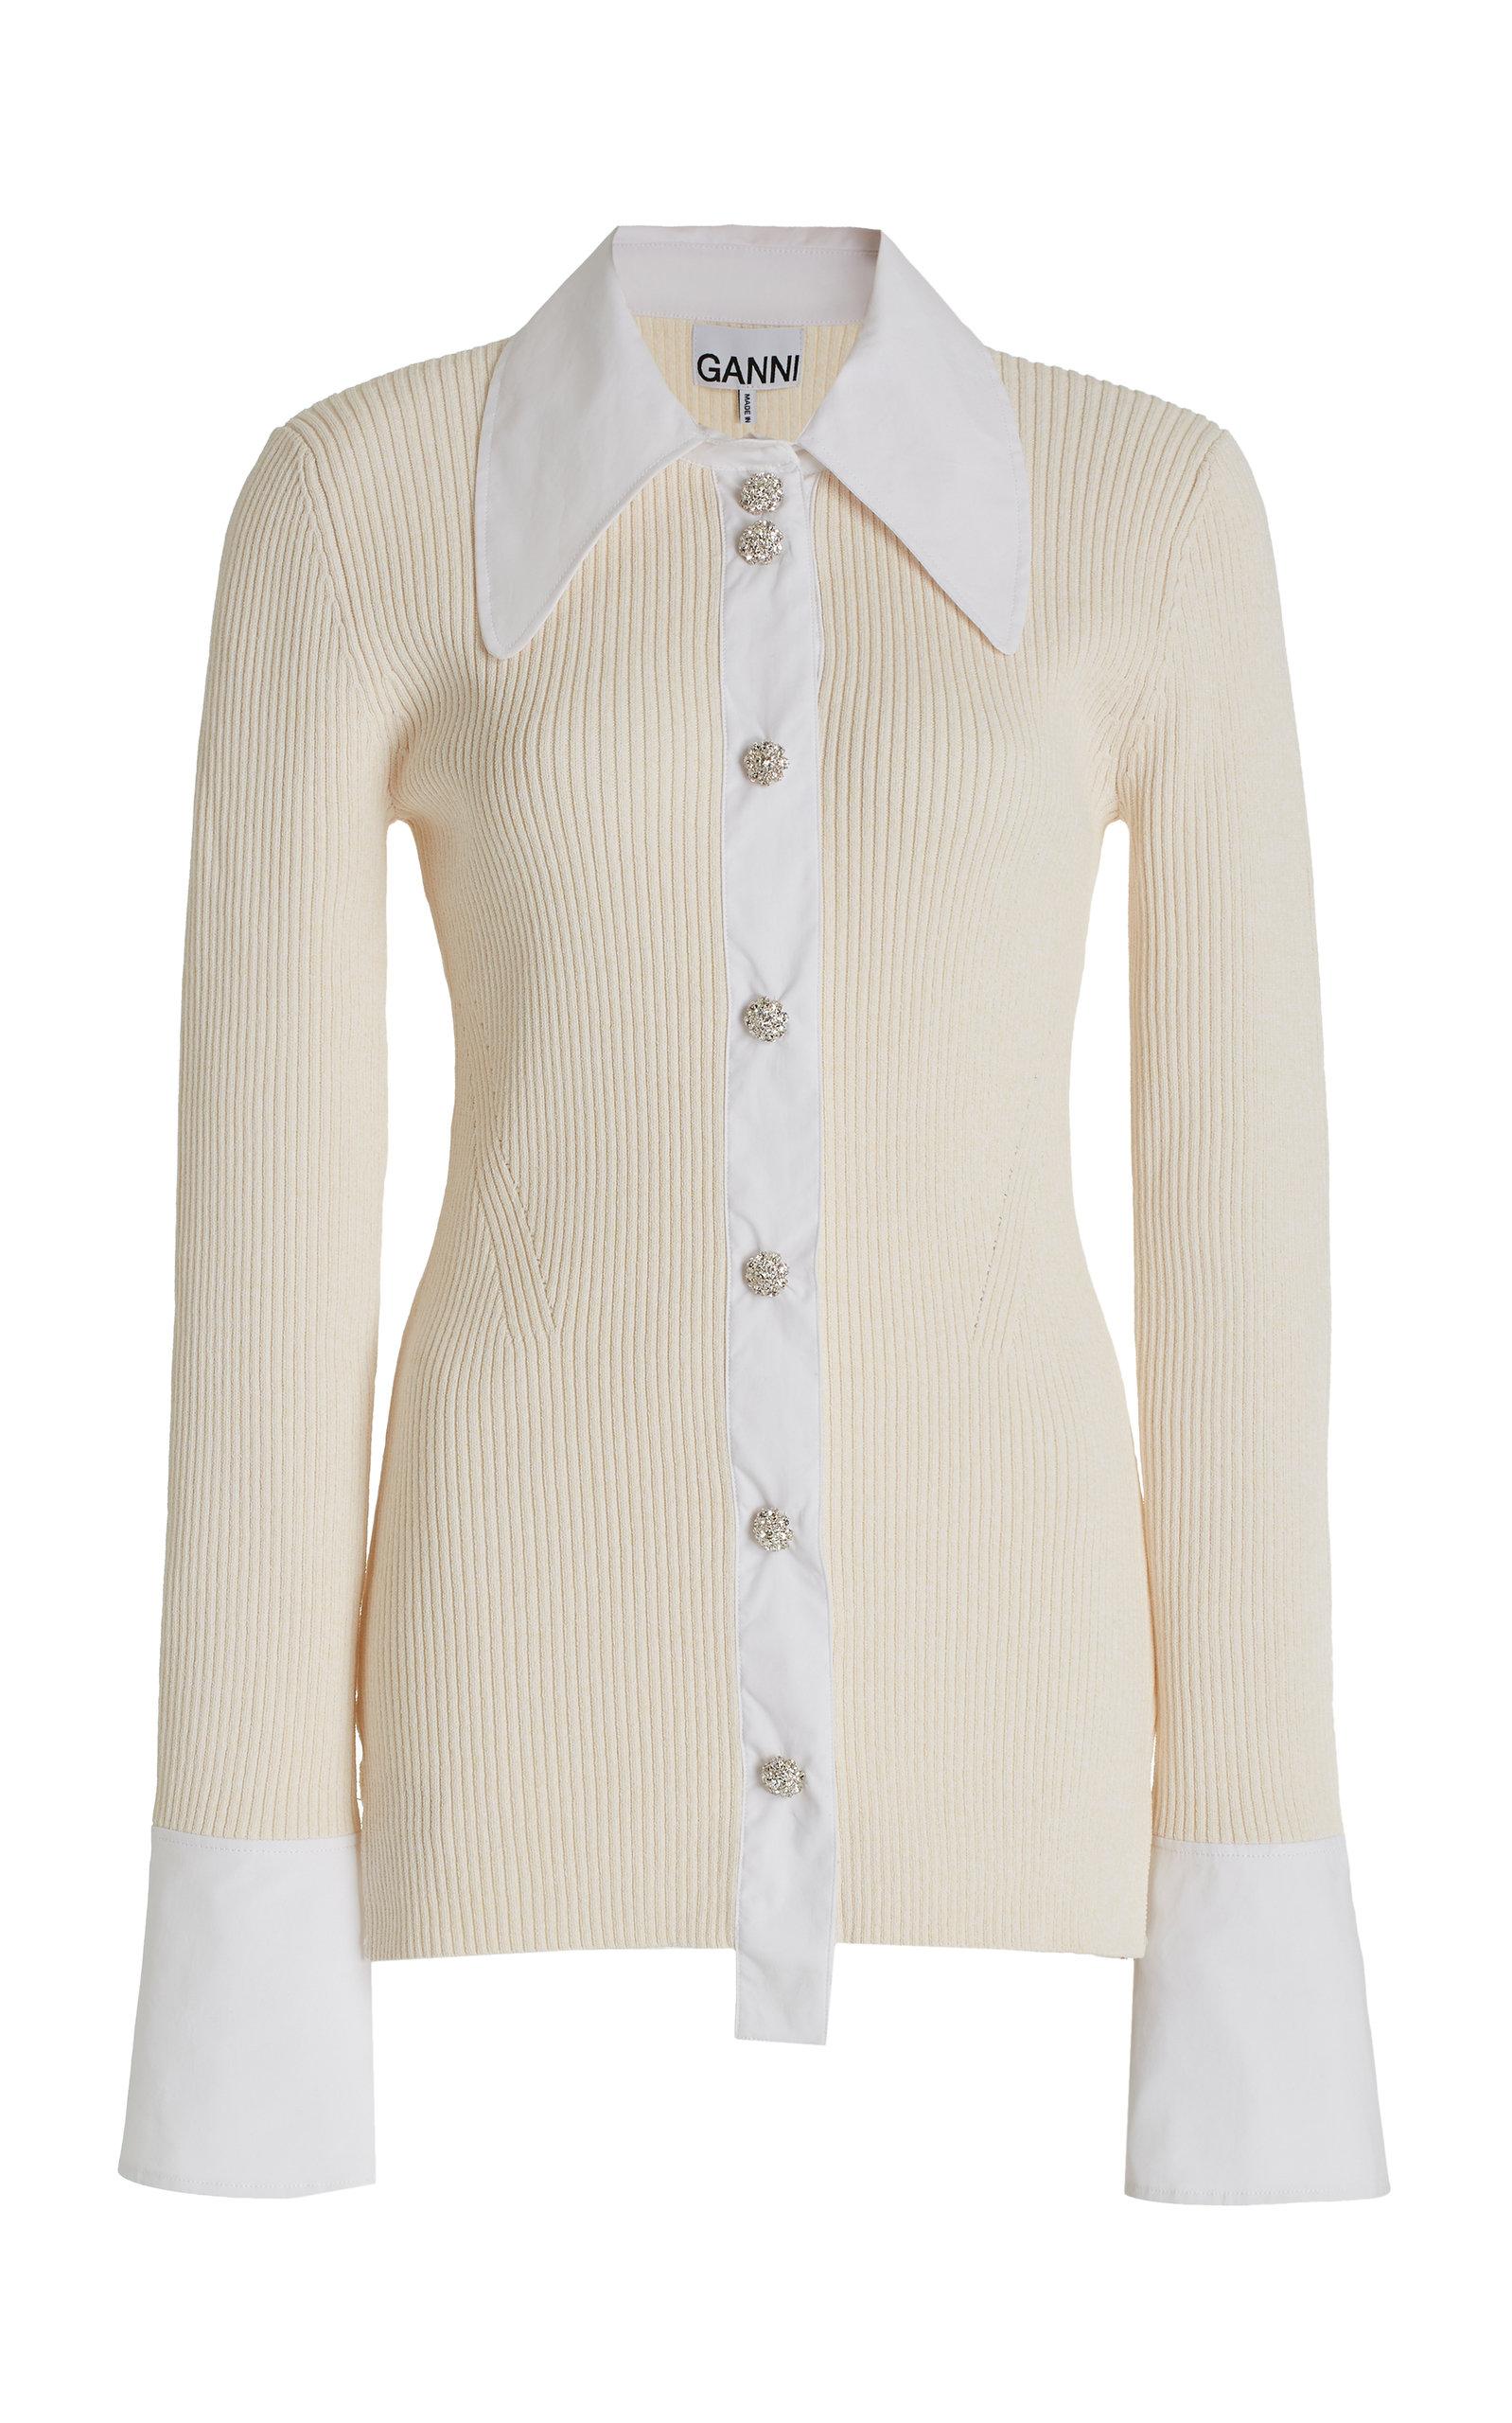 Ganni Mélange Ribbed-knit Top in White | Lyst Australia